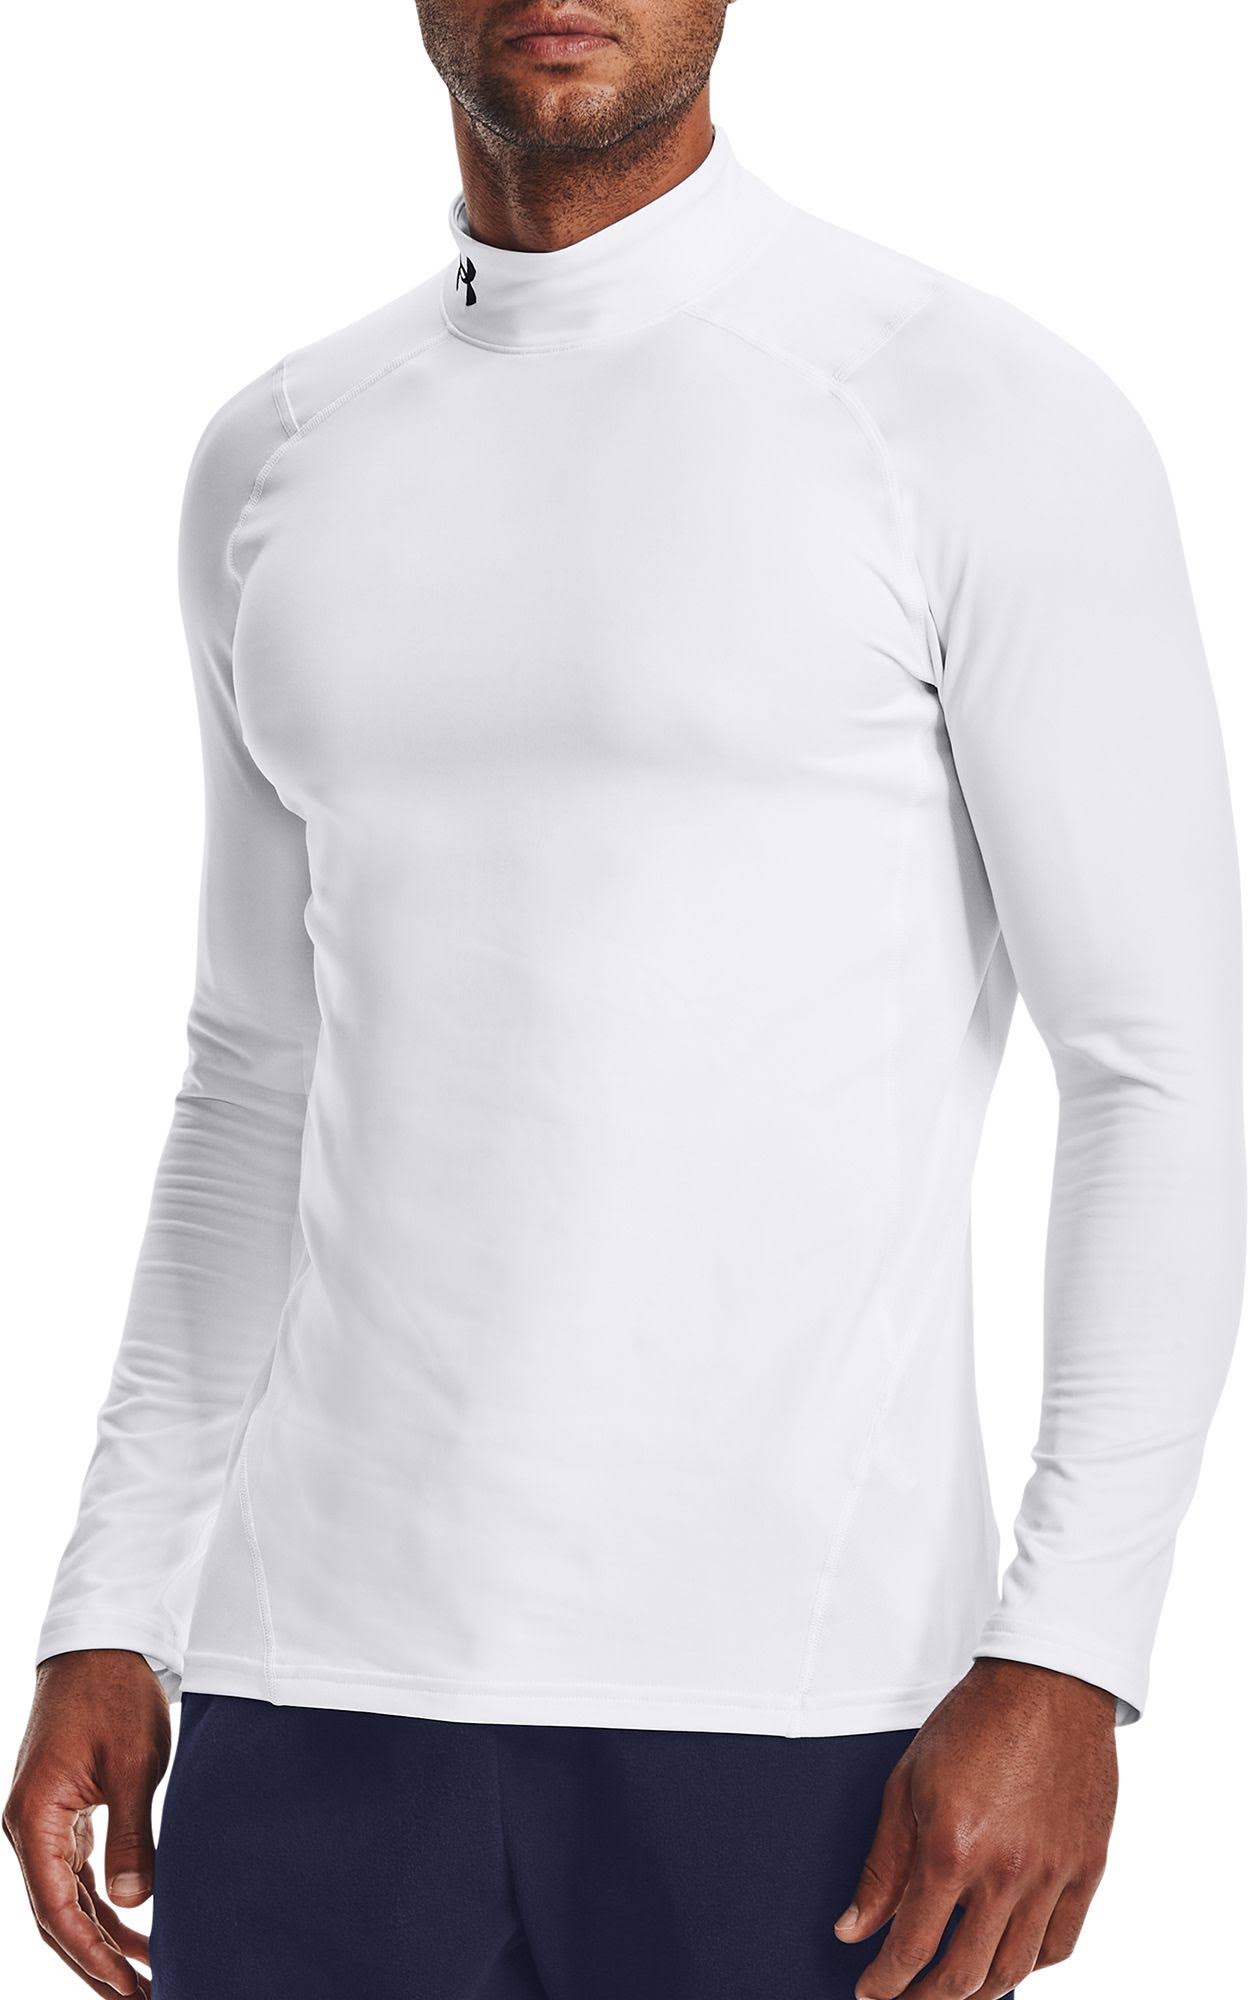 Under Armour Men's ColdGear Armour Fitted Mock Black MD